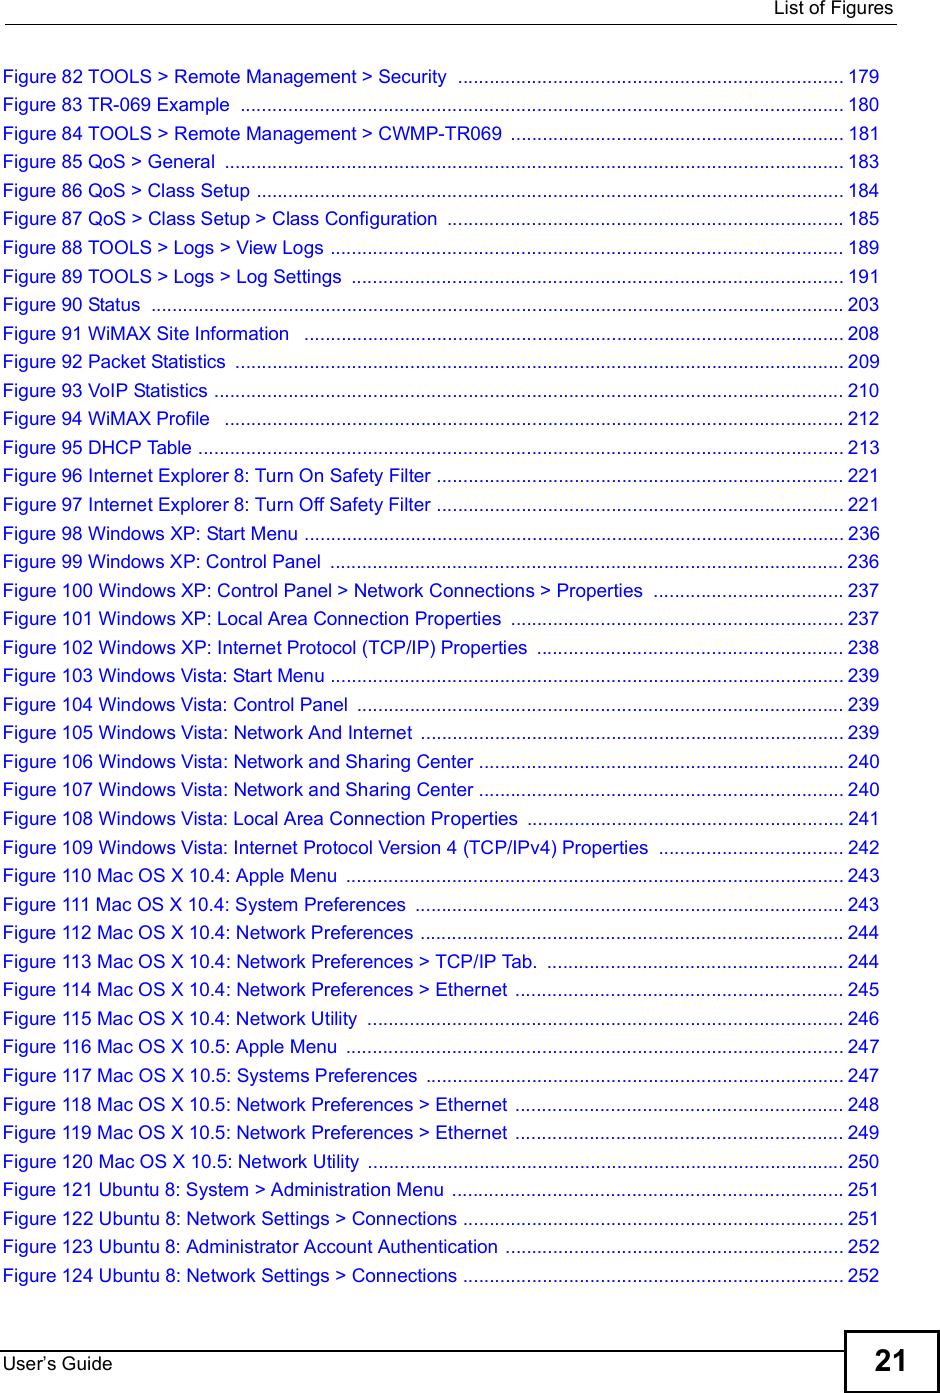  List of FiguresUser s Guide 21Figure 82 TOOLS &gt; Remote Management &gt; Security .........................................................................179Figure 83 TR-069 Example ..................................................................................................................180Figure 84 TOOLS &gt; Remote Management &gt; CWMP-TR069 ...............................................................181Figure 85 QoS &gt; General .....................................................................................................................183Figure 86 QoS &gt; Class Setup ...............................................................................................................184Figure 87 QoS &gt; Class Setup &gt; Class Configuration ...........................................................................185Figure 88 TOOLS &gt; Logs &gt; View Logs .................................................................................................189Figure 89 TOOLS &gt; Logs &gt; Log Settings .............................................................................................191Figure 90 Status ...................................................................................................................................203Figure 91 WiMAX Site Information  ......................................................................................................208Figure 92 Packet Statistics ...................................................................................................................209Figure 93 VoIP Statistics .......................................................................................................................210Figure 94 WiMAX Profile  .....................................................................................................................212Figure 95 DHCP Table ..........................................................................................................................213Figure 96 Internet Explorer 8: Turn On Safety Filter .............................................................................221Figure 97 Internet Explorer 8: Turn Off Safety Filter .............................................................................221Figure 98 Windows XP: Start Menu ......................................................................................................236Figure 99 Windows XP: Control Panel .................................................................................................236Figure 100 Windows XP: Control Panel &gt; Network Connections &gt; Properties ....................................237Figure 101 Windows XP: Local Area Connection Properties ...............................................................237Figure 102 Windows XP: Internet Protocol (TCP/IP) Properties ..........................................................238Figure 103 Windows Vista: Start Menu .................................................................................................239Figure 104 Windows Vista: Control Panel ............................................................................................239Figure 105 Windows Vista: Network And Internet ................................................................................239Figure 106 Windows Vista: Network and Sharing Center .....................................................................240Figure 107 Windows Vista: Network and Sharing Center .....................................................................240Figure 108 Windows Vista: Local Area Connection Properties ............................................................241Figure 109 Windows Vista: Internet Protocol Version 4 (TCP/IPv4) Properties ...................................242Figure 110 Mac OS X 10.4: Apple Menu ..............................................................................................243Figure 111 Mac OS X 10.4: System Preferences .................................................................................243Figure 112 Mac OS X 10.4: Network Preferences ................................................................................244Figure 113 Mac OS X 10.4: Network Preferences &gt; TCP/IP Tab. ........................................................244Figure 114 Mac OS X 10.4: Network Preferences &gt; Ethernet ..............................................................245Figure 115 Mac OS X 10.4: Network Utility ..........................................................................................246Figure 116 Mac OS X 10.5: Apple Menu ..............................................................................................247Figure 117 Mac OS X 10.5: Systems Preferences ...............................................................................247Figure 118 Mac OS X 10.5: Network Preferences &gt; Ethernet ..............................................................248Figure 119 Mac OS X 10.5: Network Preferences &gt; Ethernet ..............................................................249Figure 120 Mac OS X 10.5: Network Utility ..........................................................................................250Figure 121 Ubuntu 8: System &gt; Administration Menu ..........................................................................251Figure 122 Ubuntu 8: Network Settings &gt; Connections ........................................................................251Figure 123 Ubuntu 8: Administrator Account Authentication ................................................................252Figure 124 Ubuntu 8: Network Settings &gt; Connections ........................................................................252